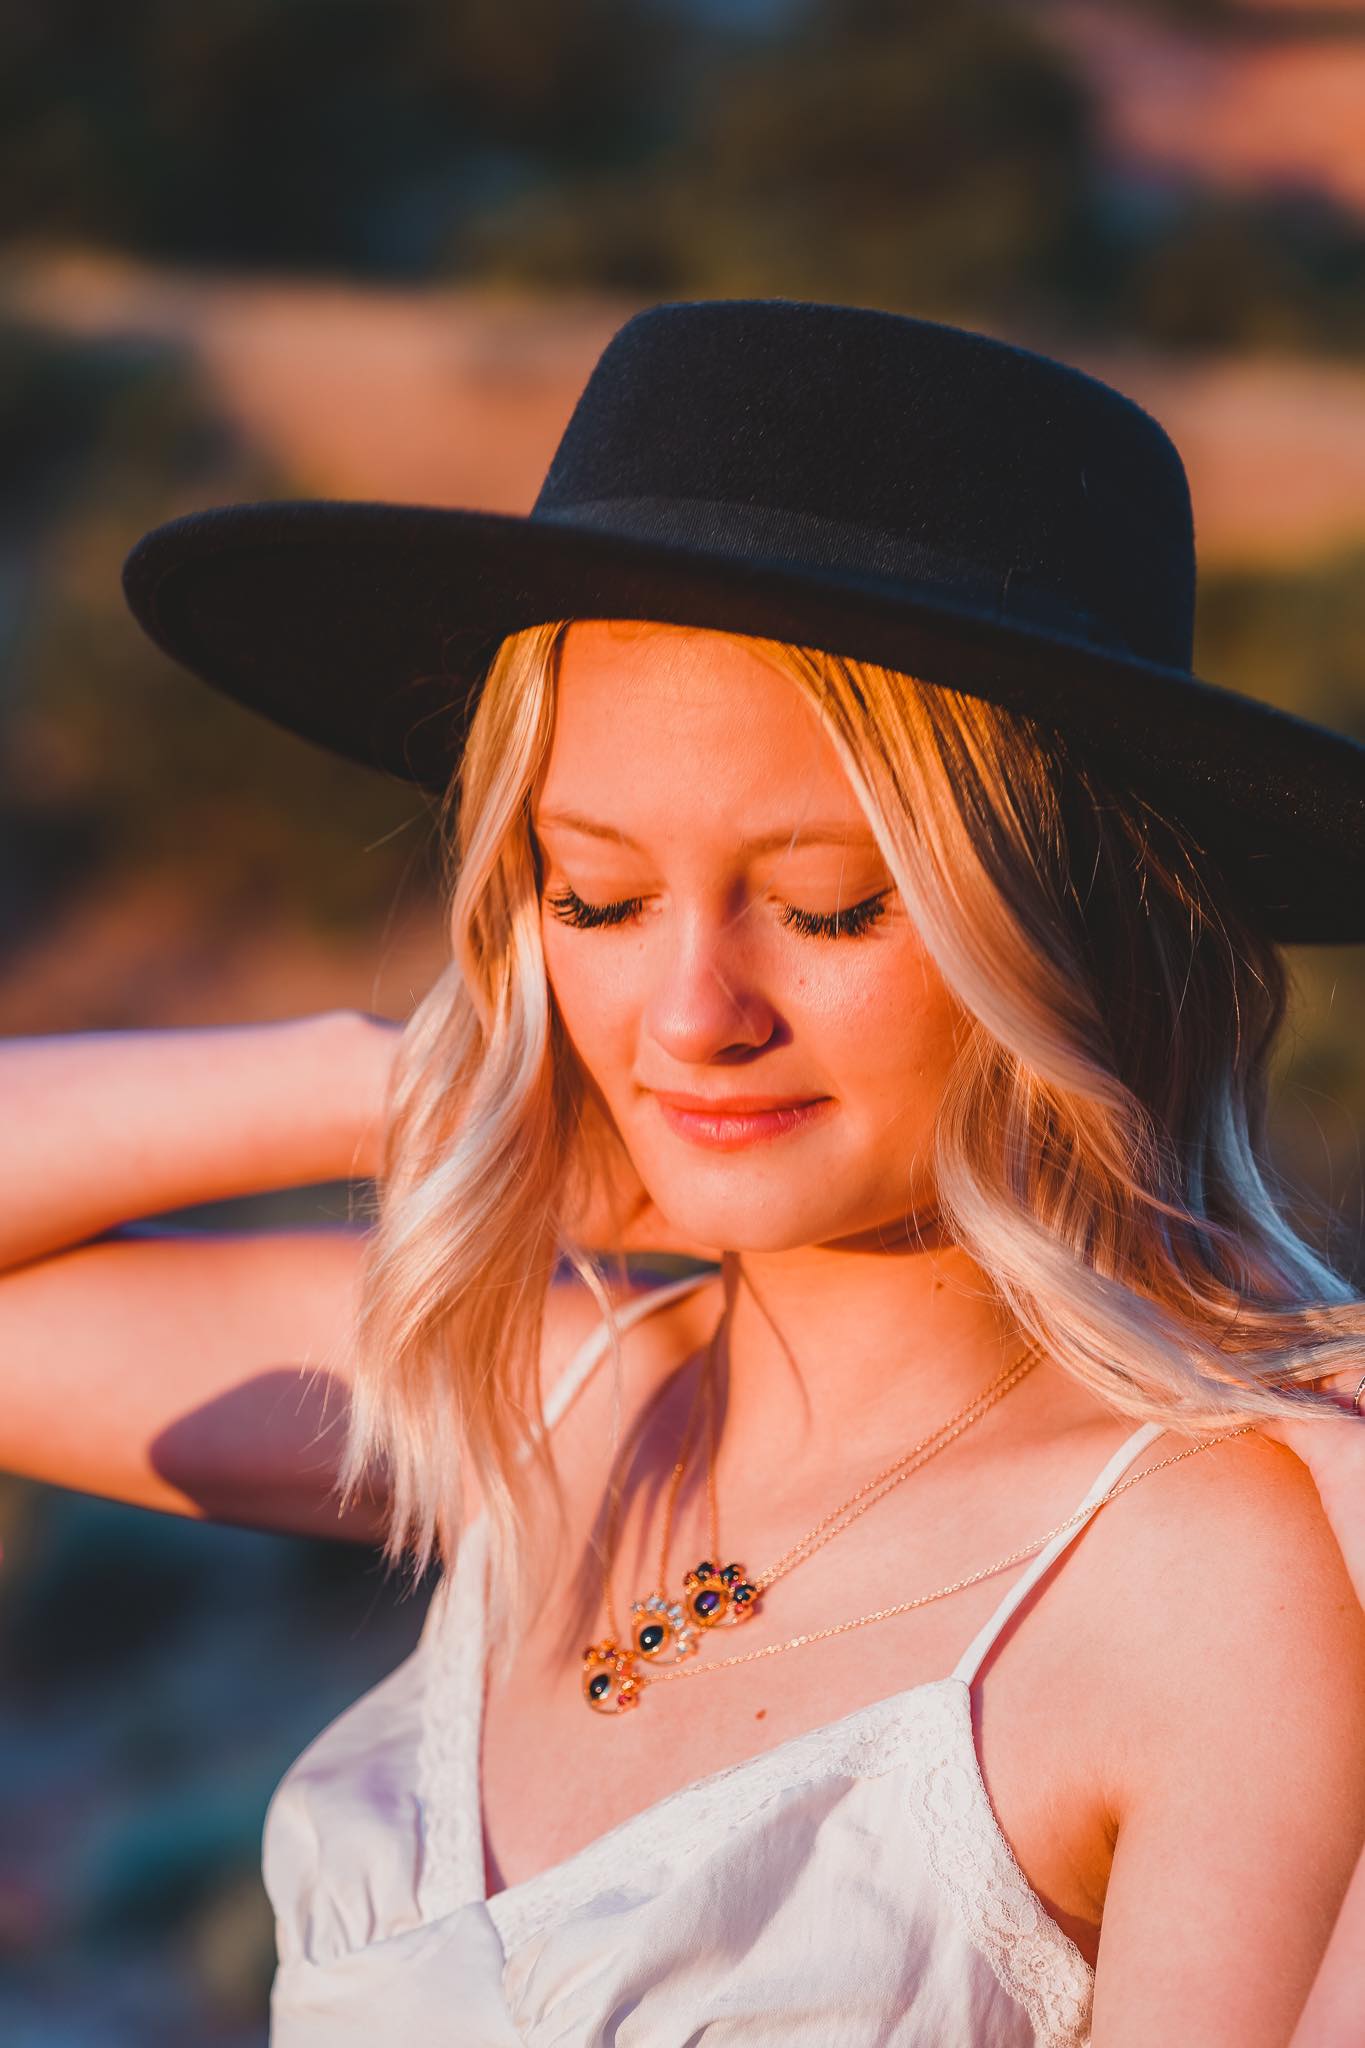 Lifestyle Image of Blonde Girl with Black Hat Wearing Three Evil Eye Necklaces by The Retrograde Shop